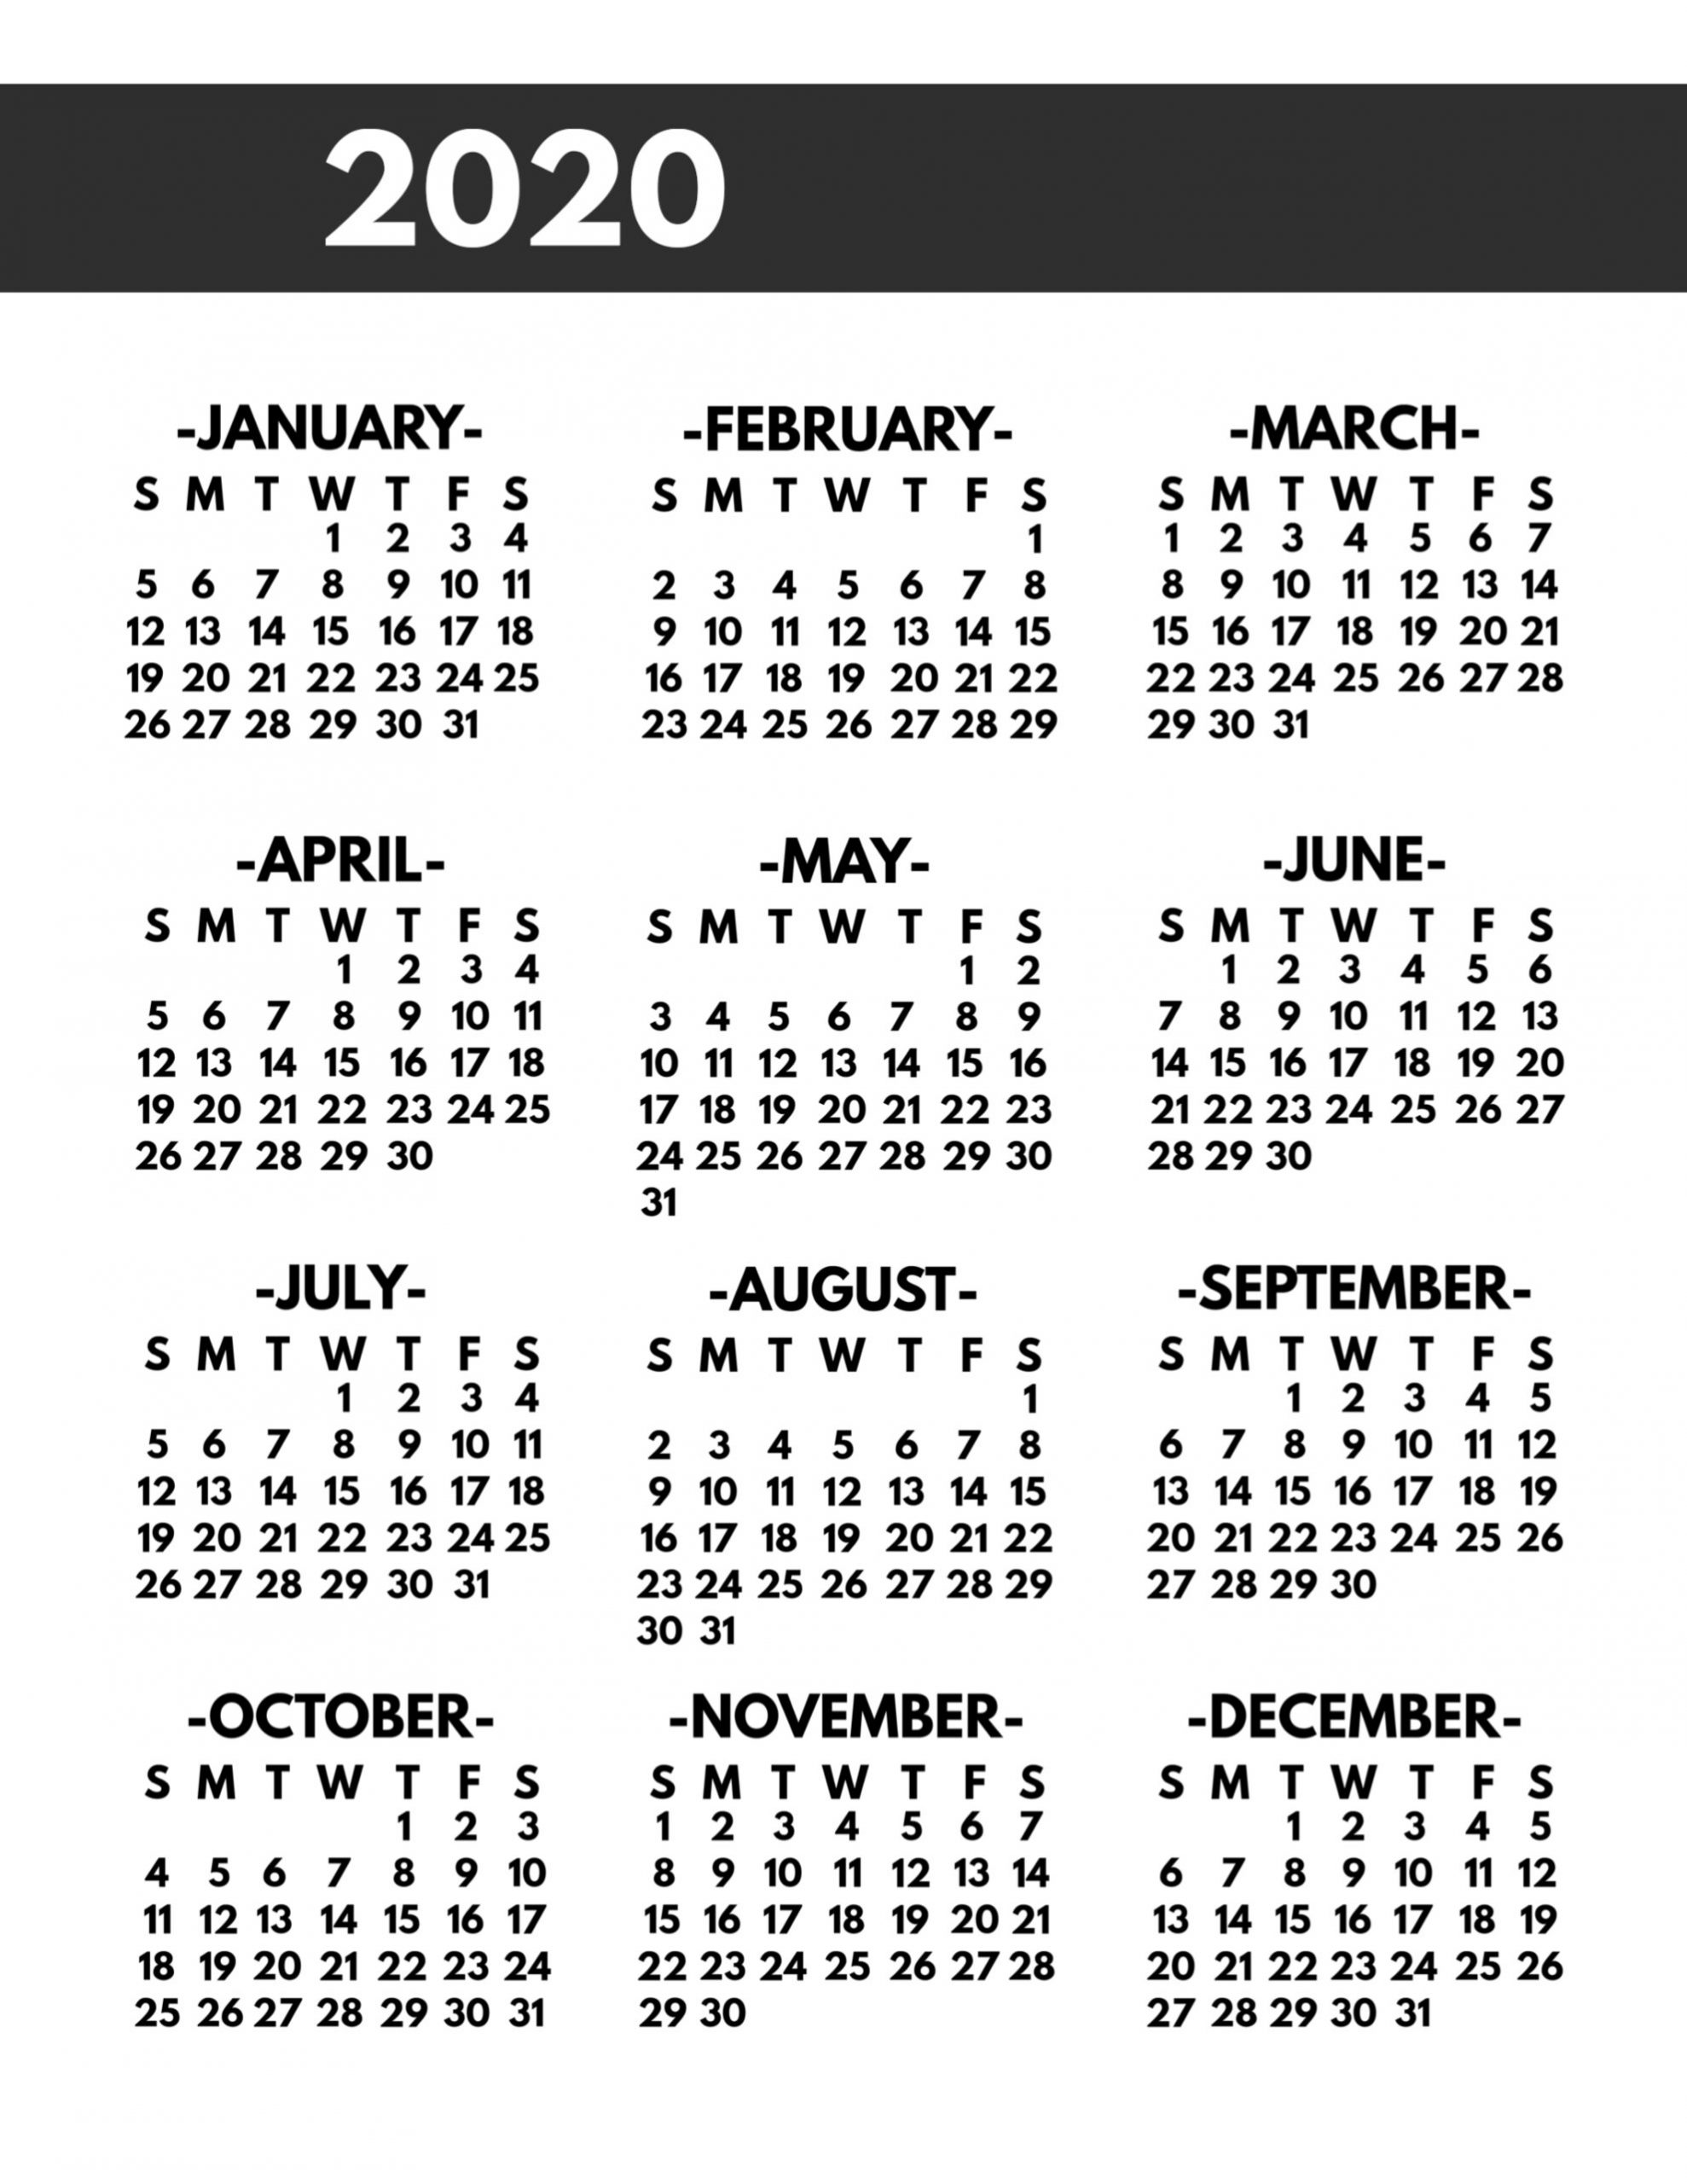 2020 Printable One Page Year At A Glance Calendar | Paper inside 2020 Calendar At A Glance Printable